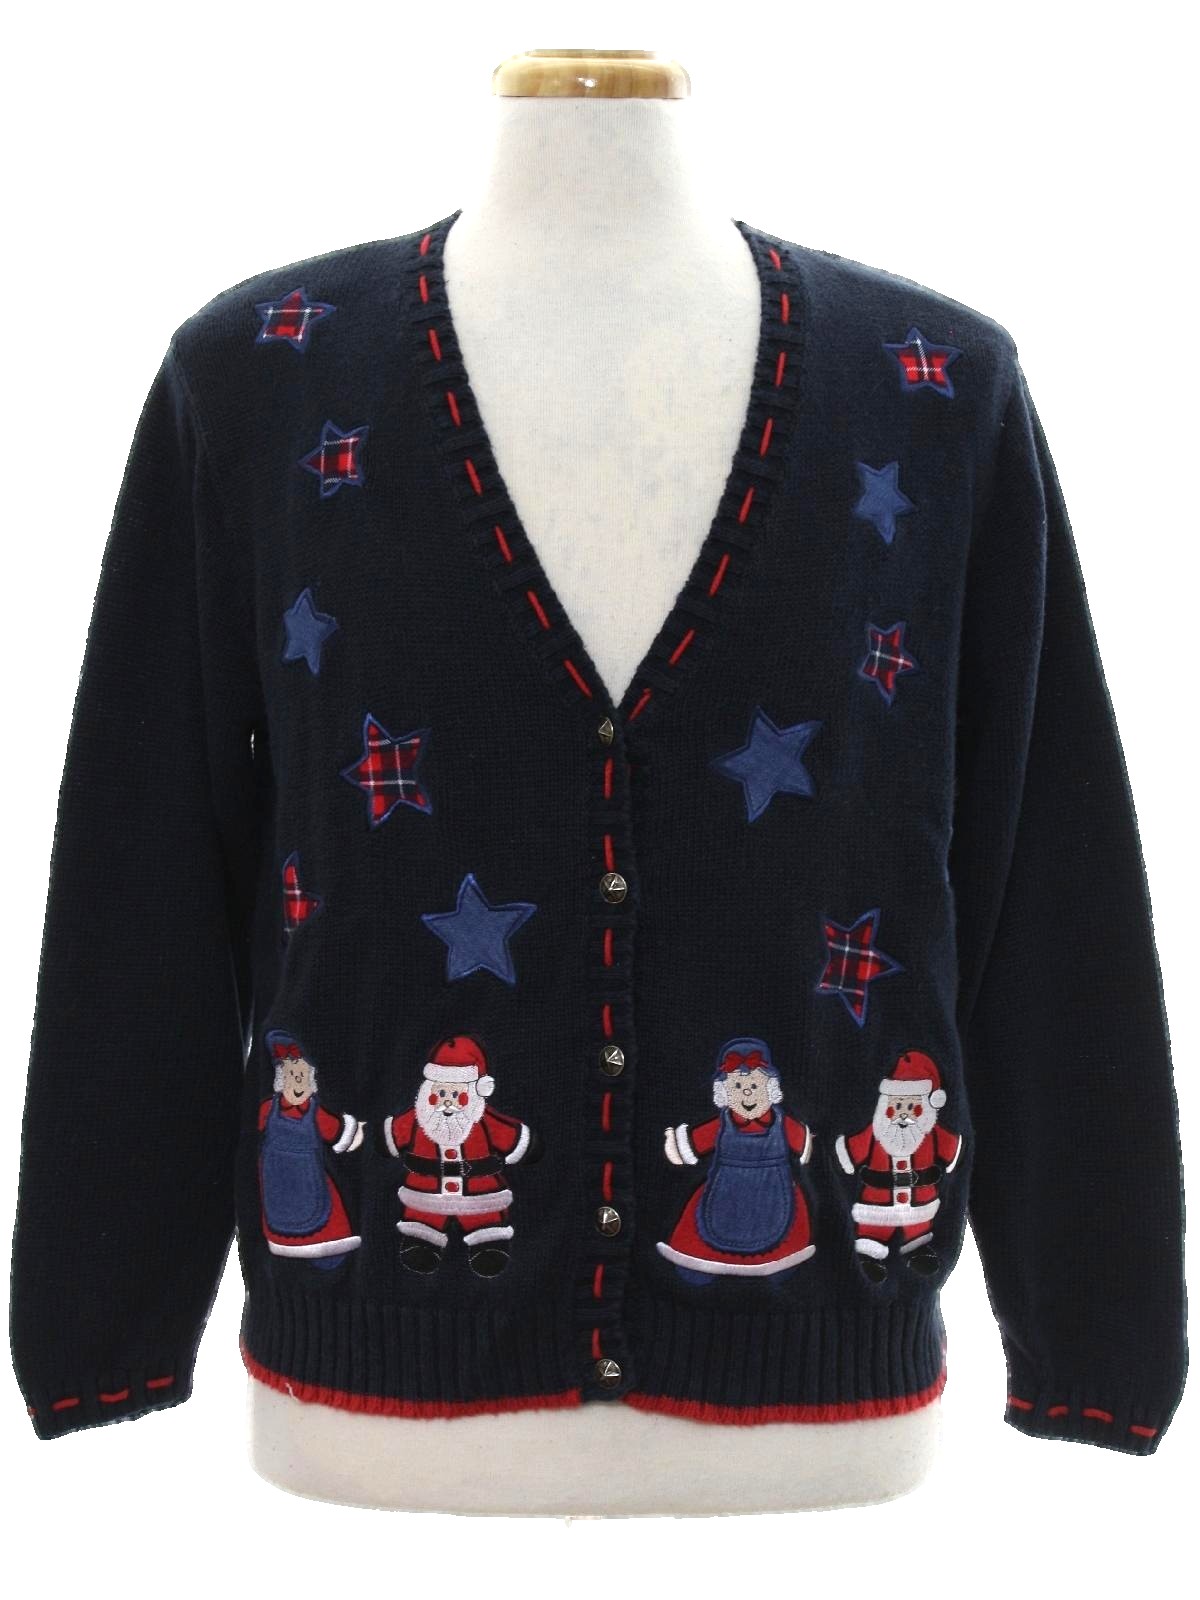 Ugly Christmas Cardigan Sweater: -Christopher and Bank- Unisex blue ...